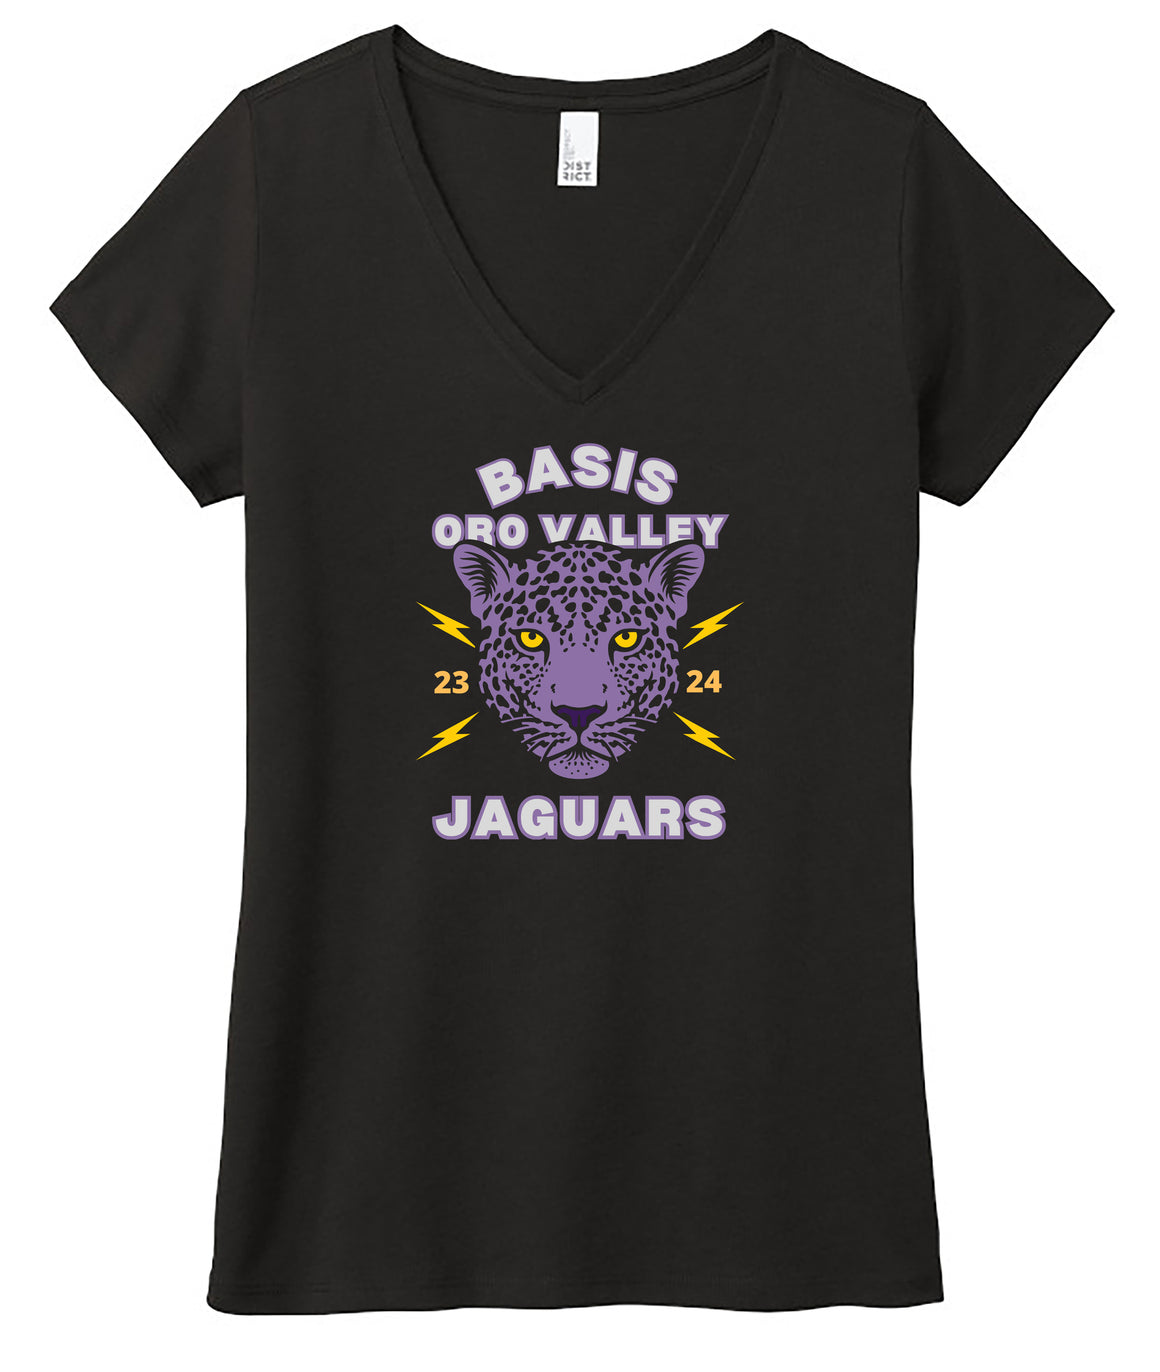 Basis Oro Valley Ladie V Neck (Not for Students)